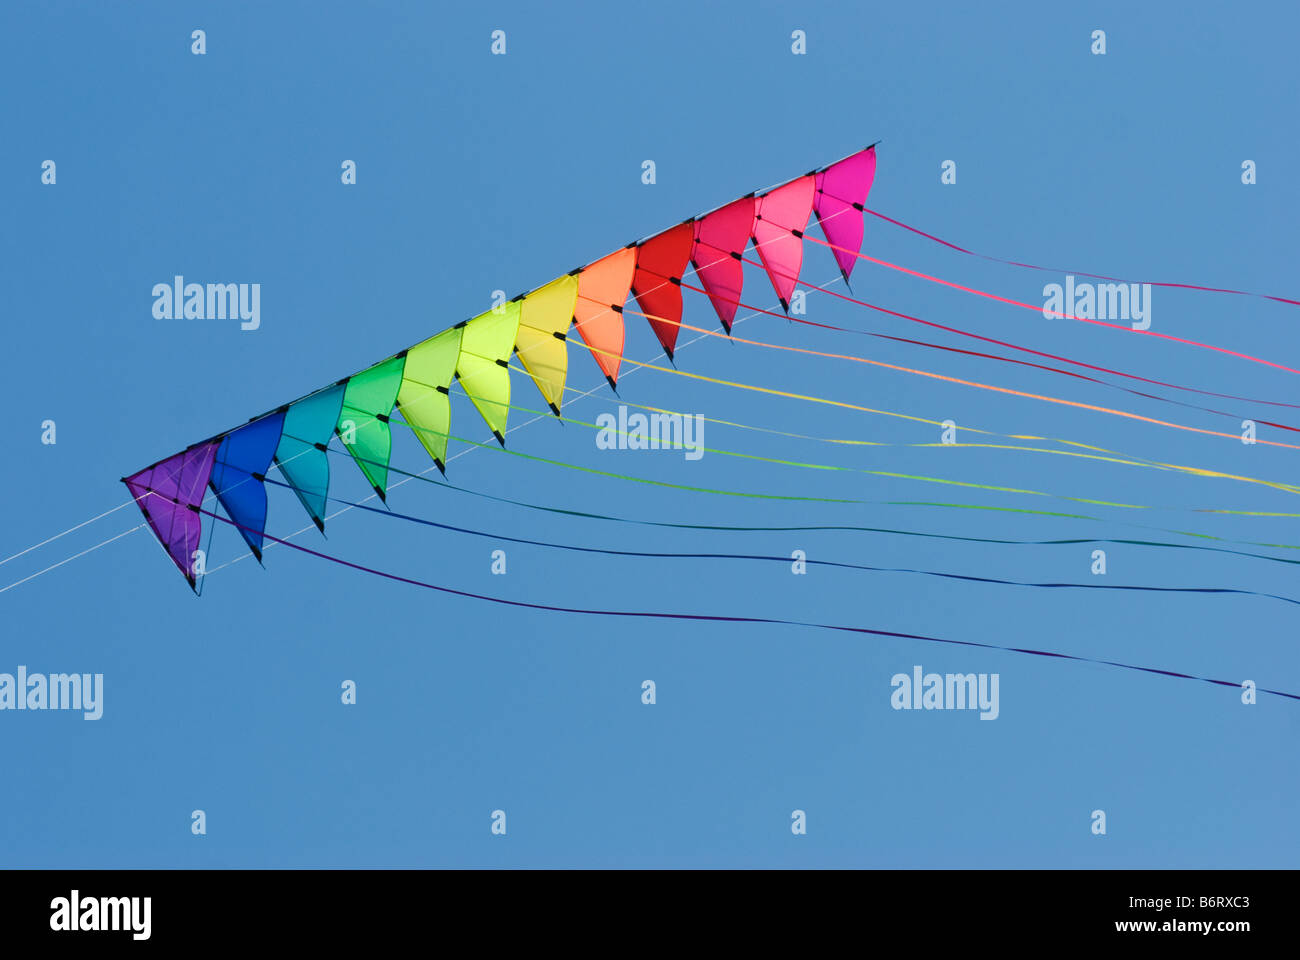 Stack of 12 stunt kites in rainbow colours on a blue sky background Stock Photo